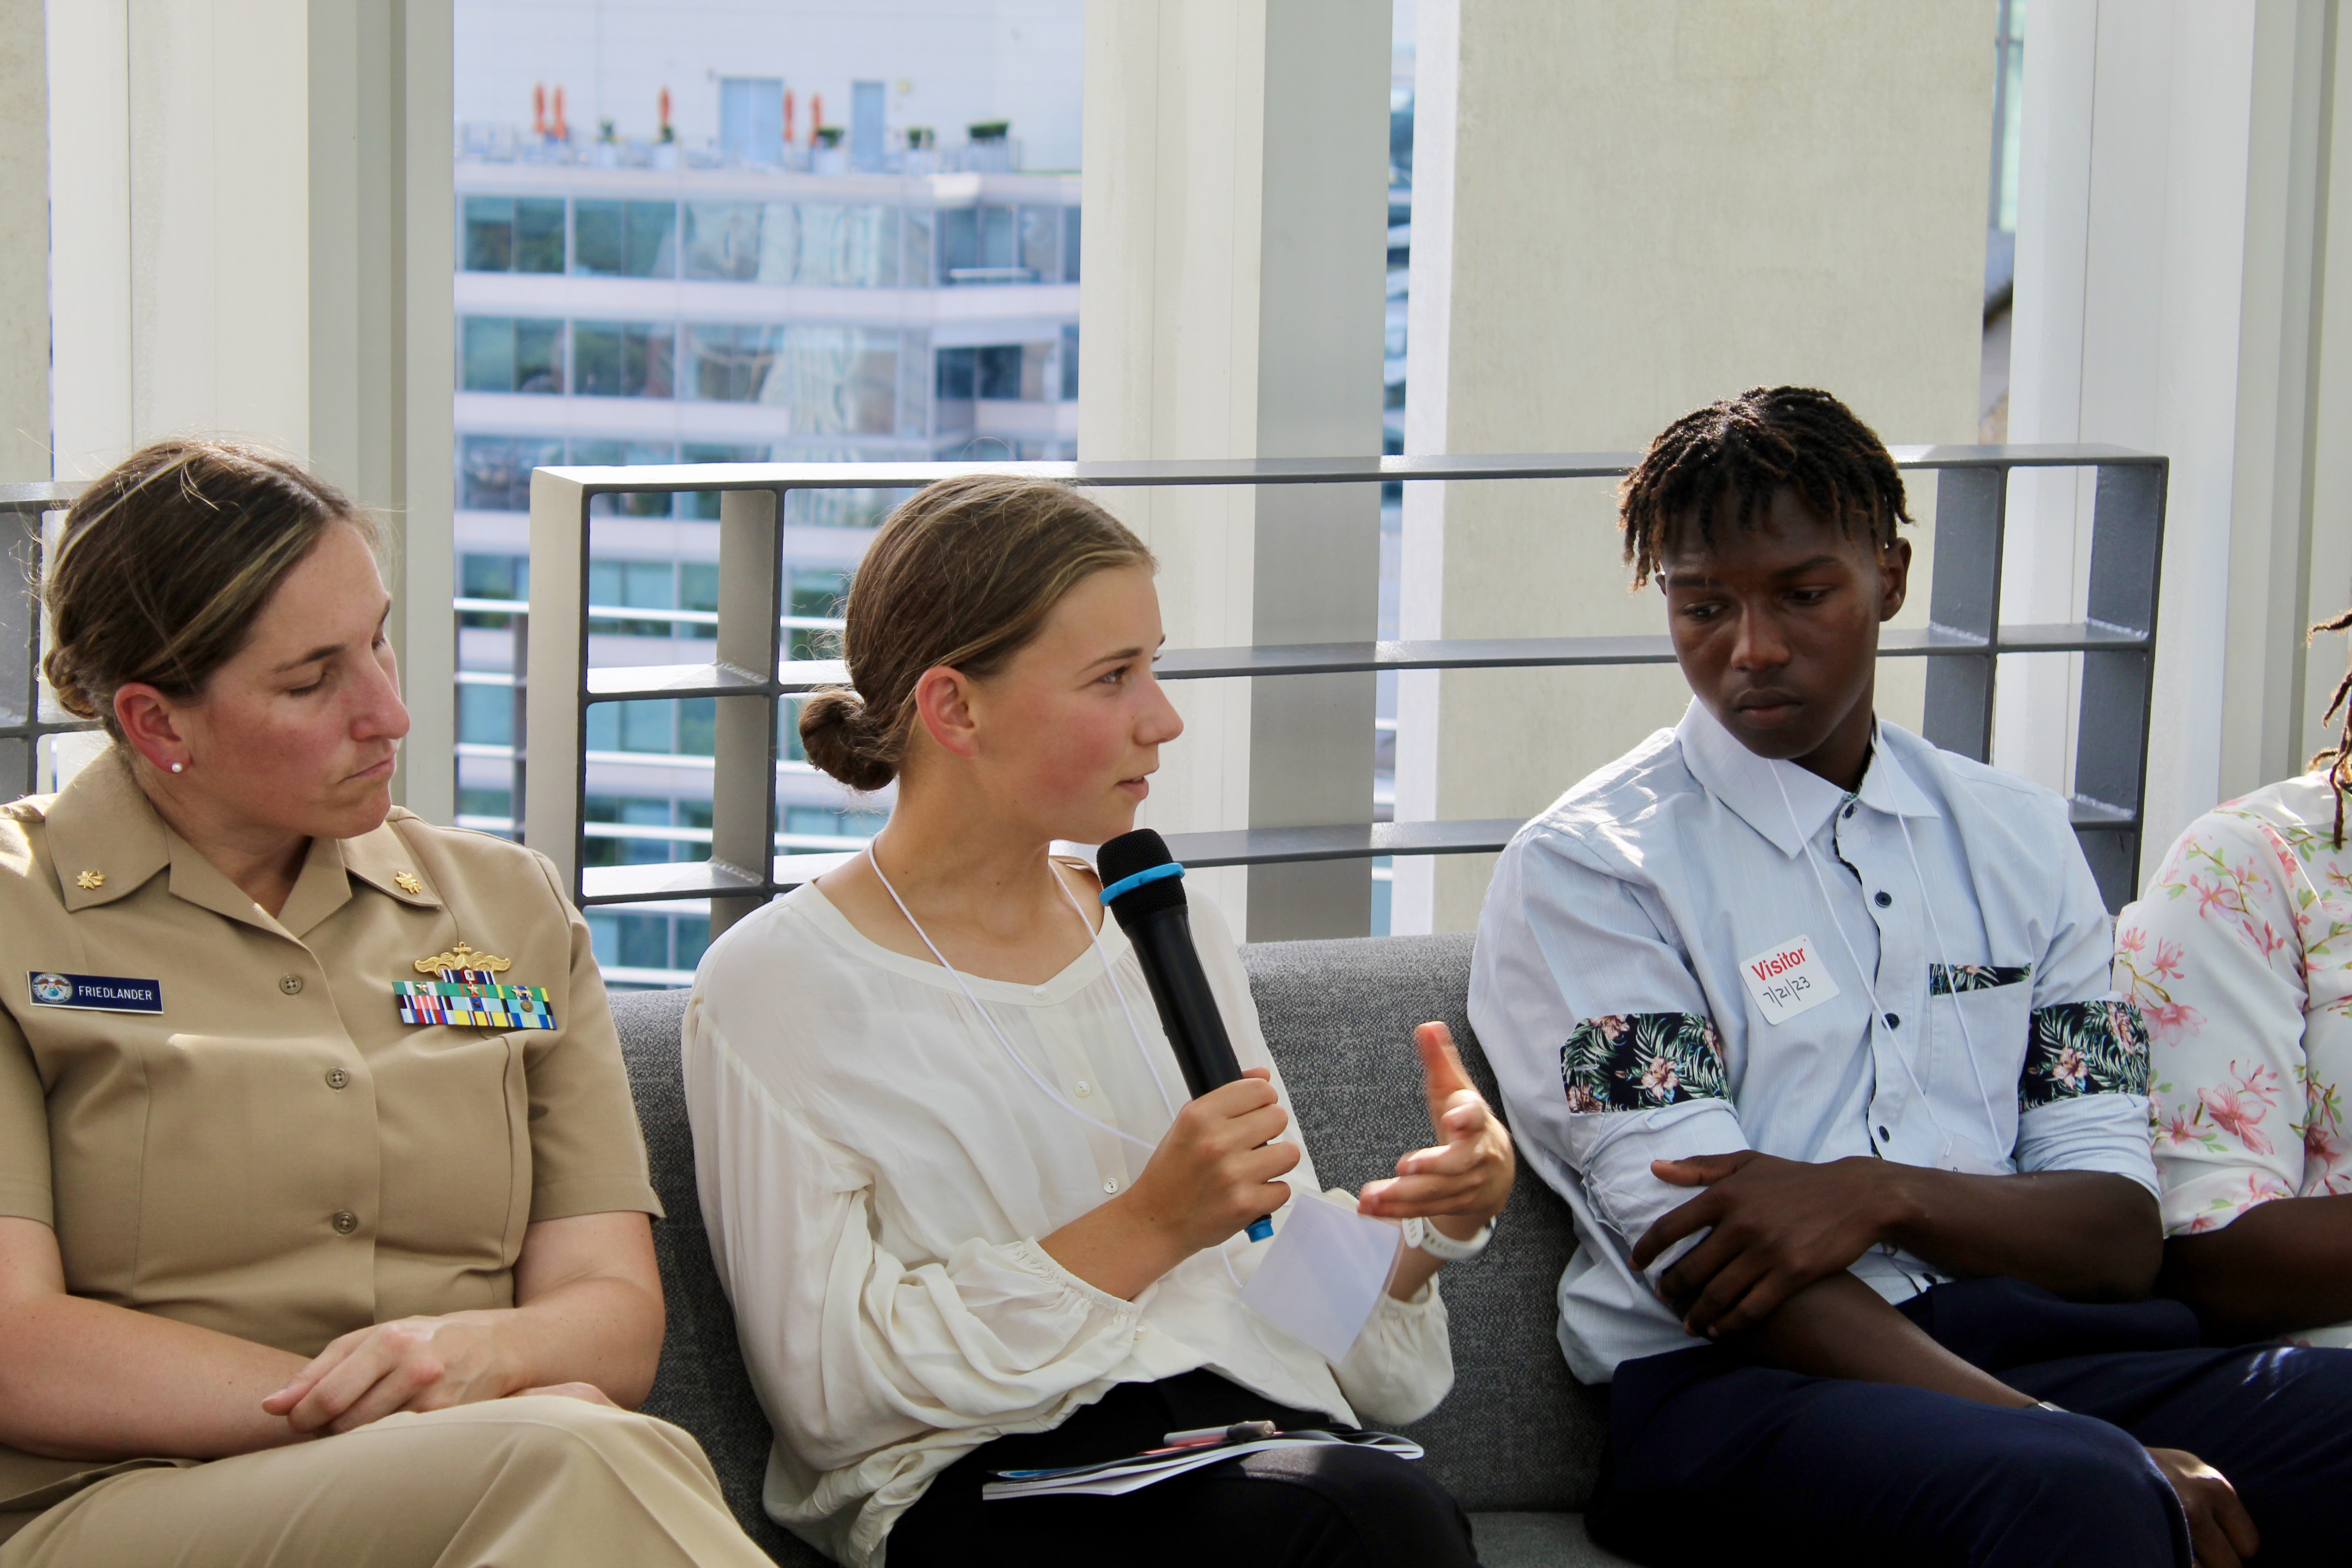 A high school student sits on a couch outside, speaking to the group with a microphone in hand. A NOAA Corps officer and another high school student sit on either side of her.